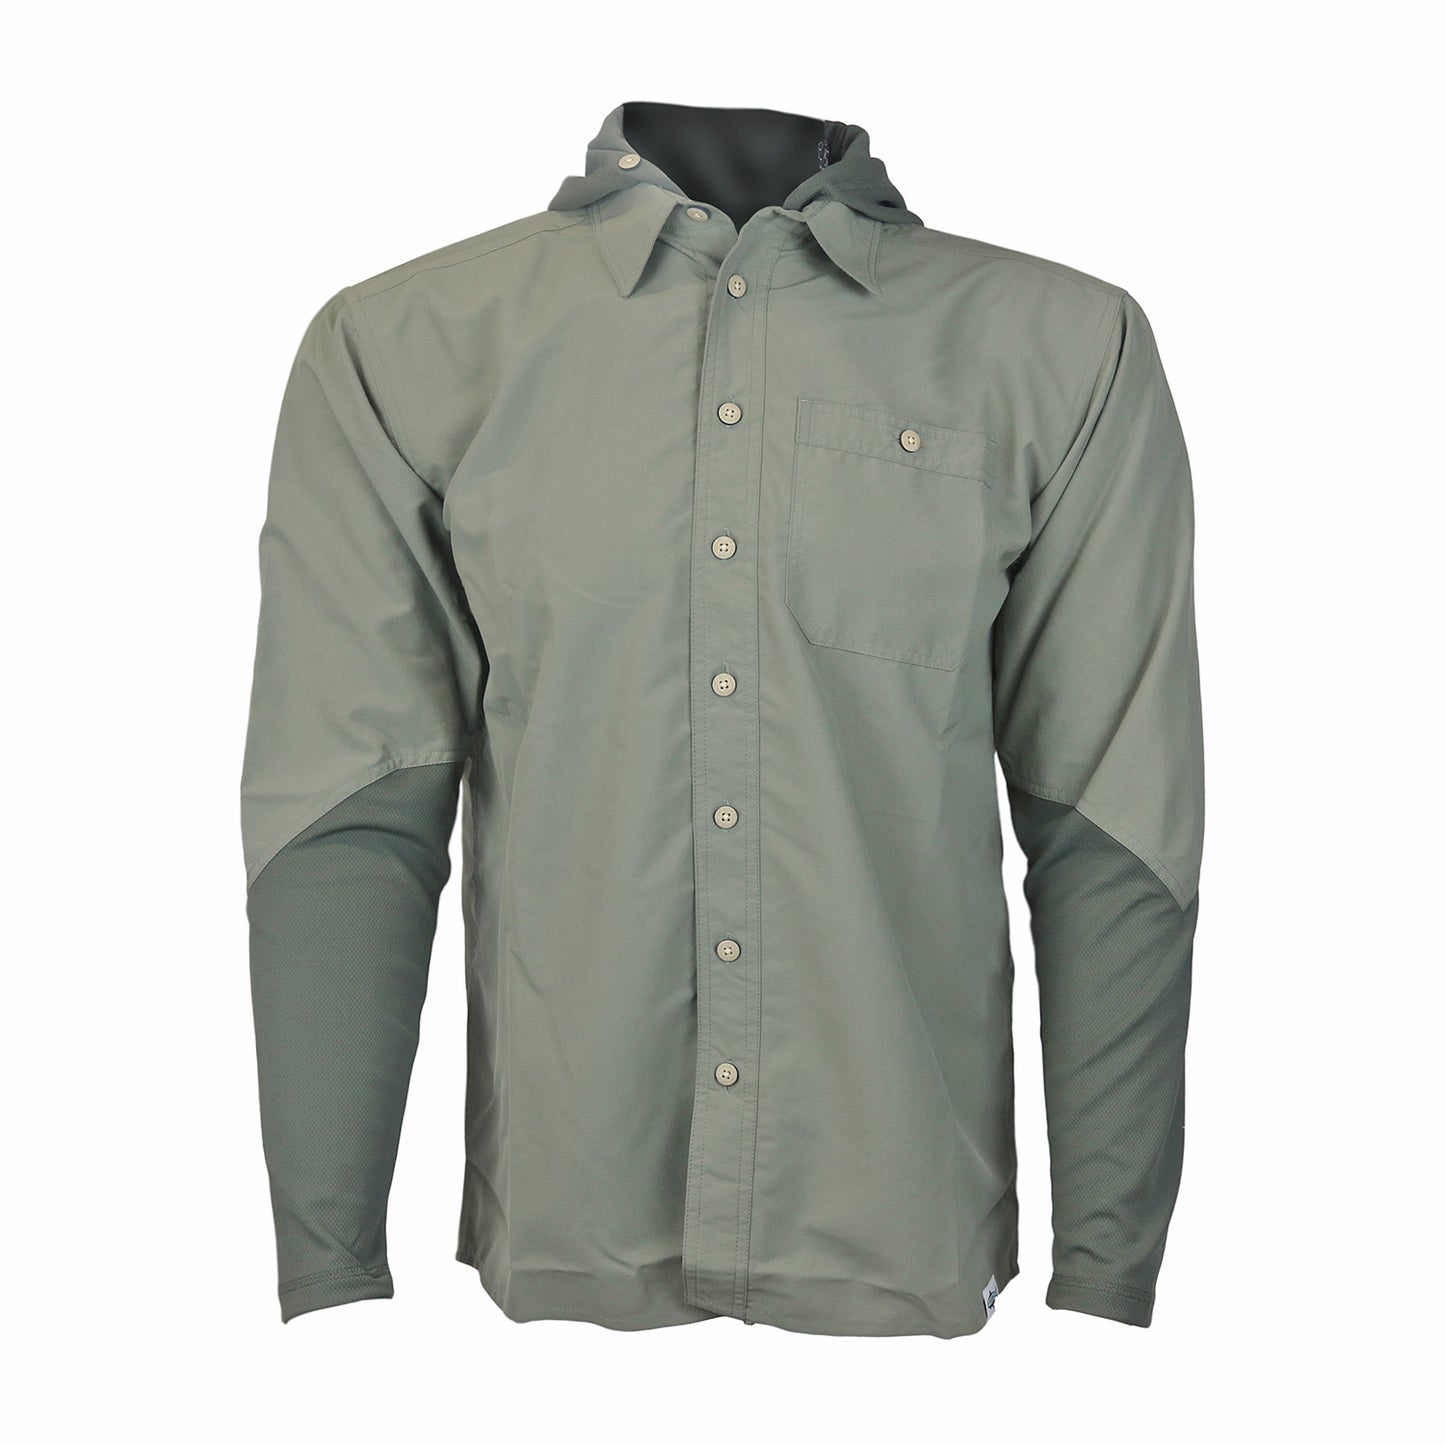 A sage green button up shirt with crew sleeves, a collar and a hood down over the back.